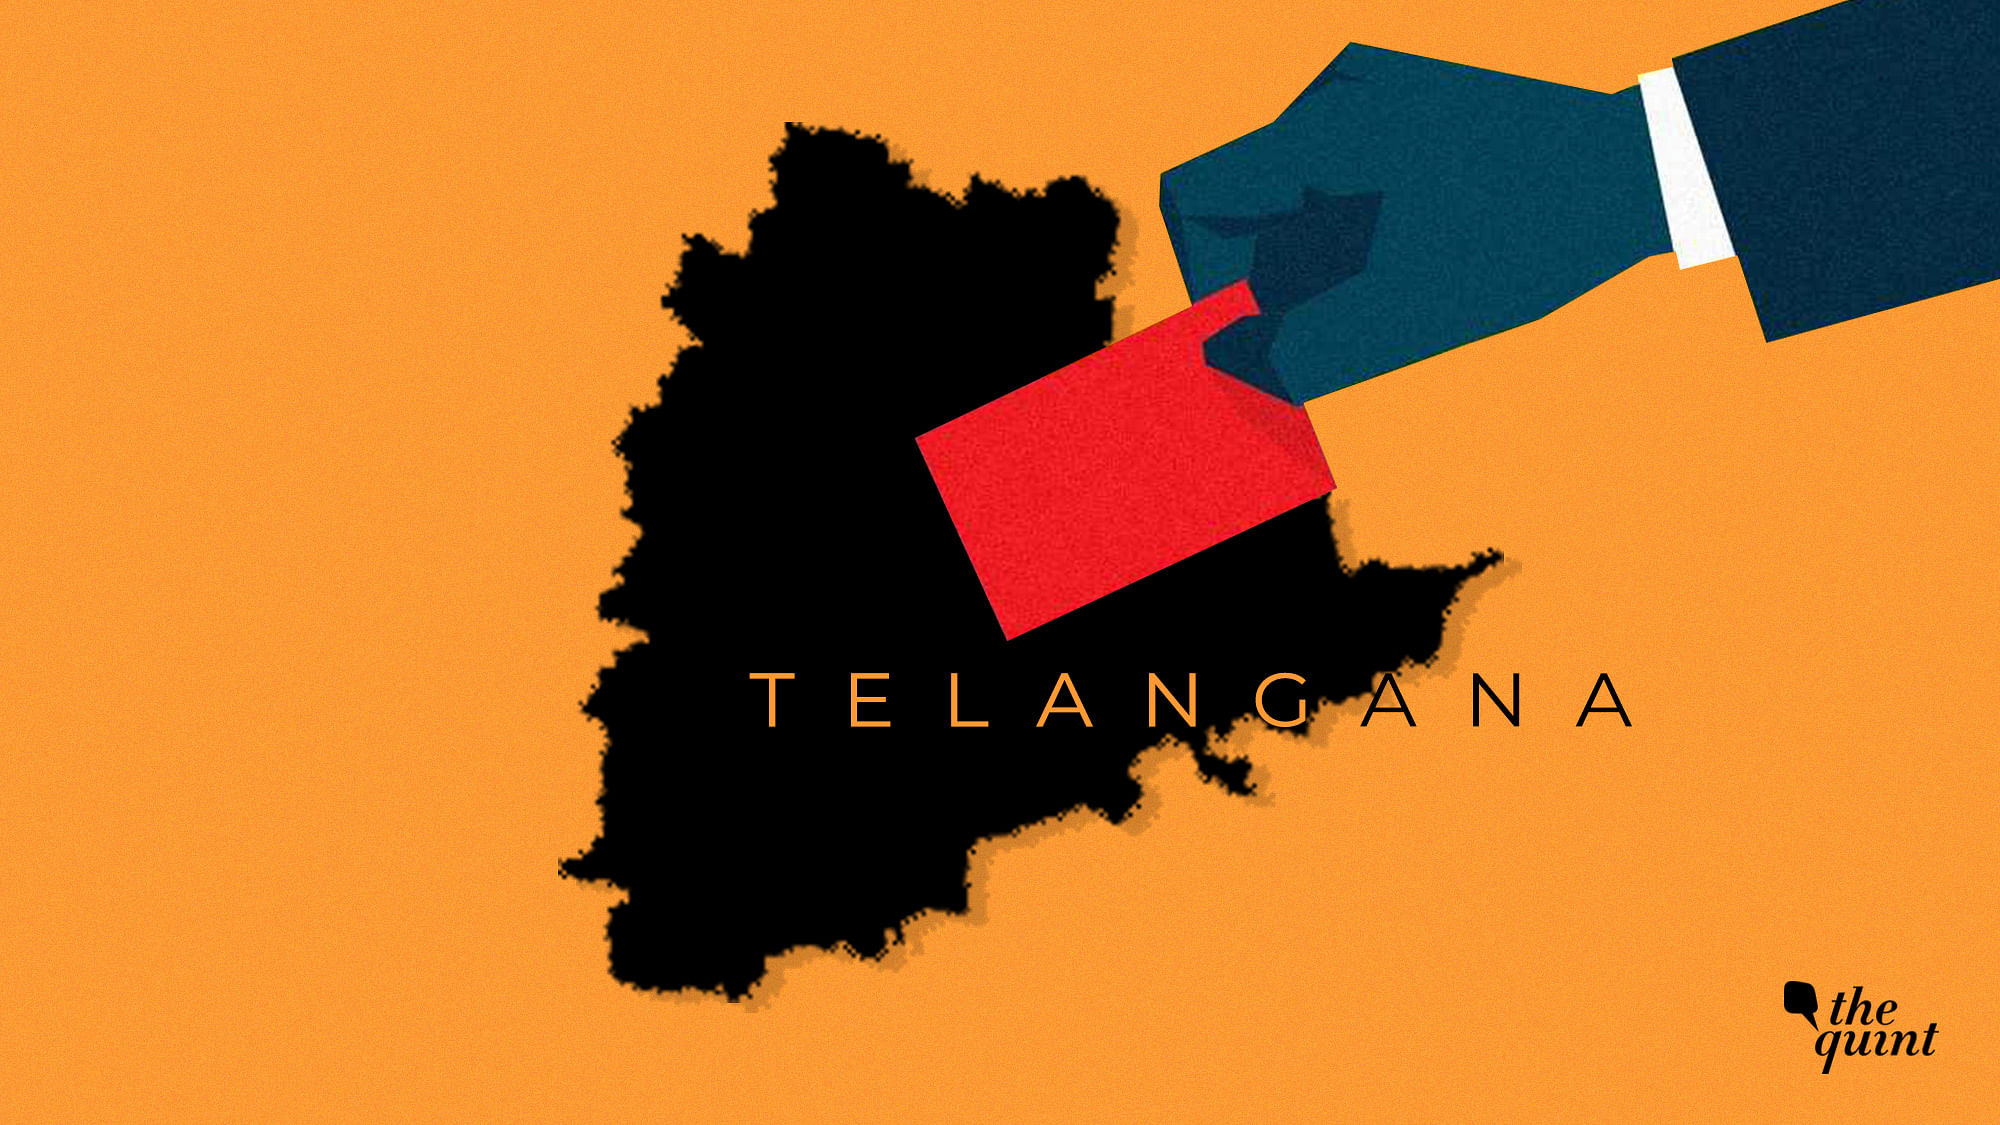 India’s youngest state, Telangana goes to polls on 7 December, to constitute its second Legislative Assembly.